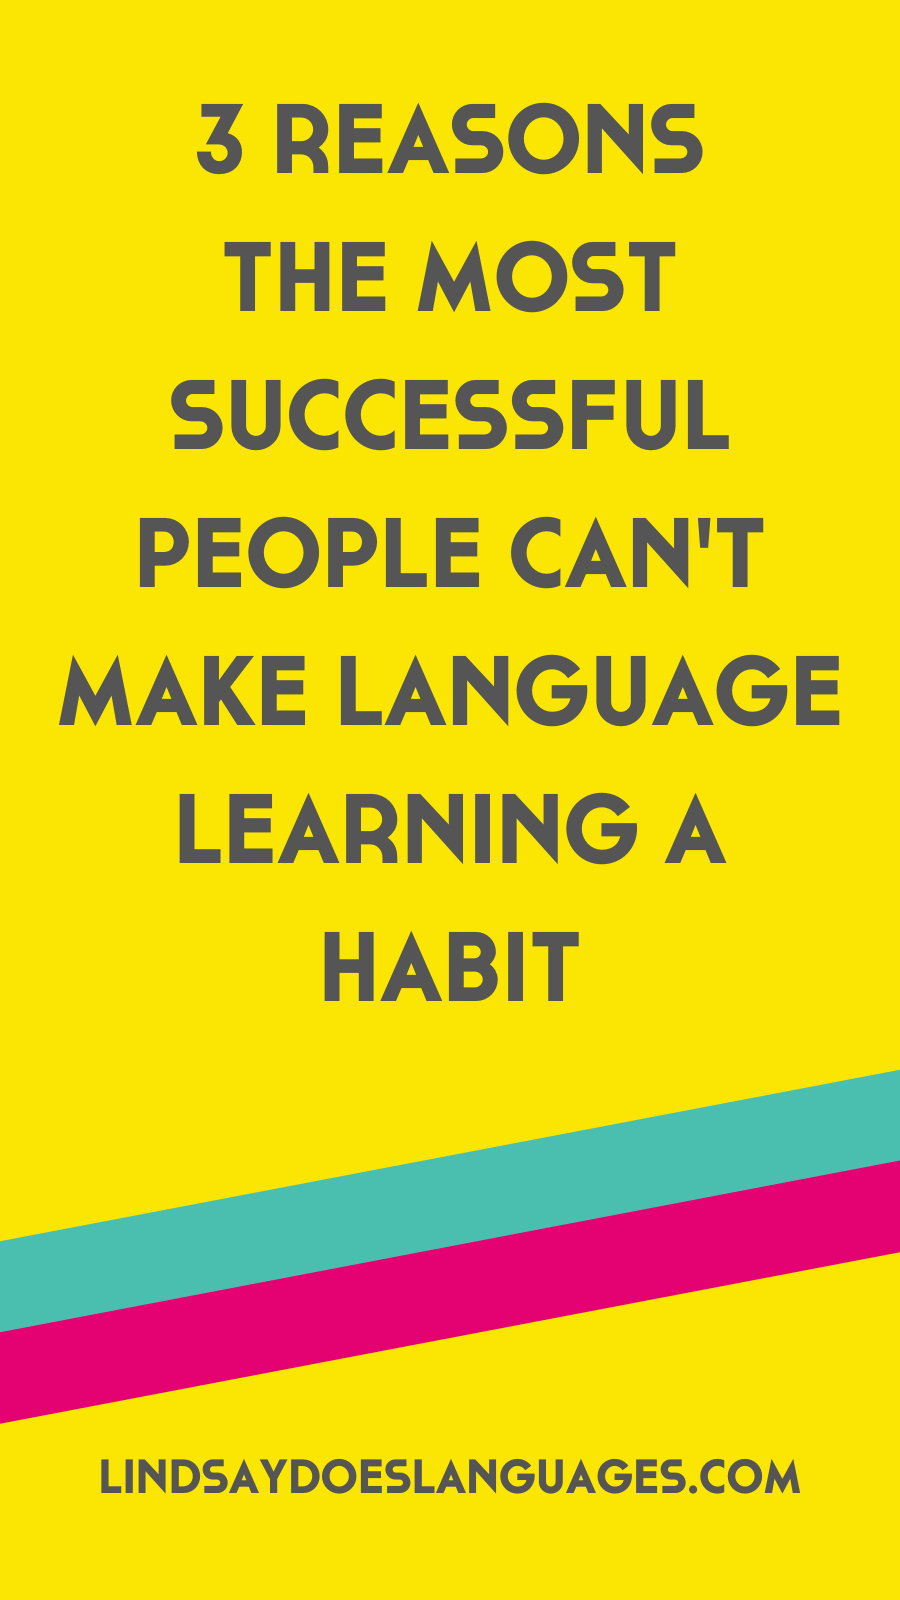 Want to know why successful people can't make language learning a habit? There's 3 simple reasons to help you make language habits better.